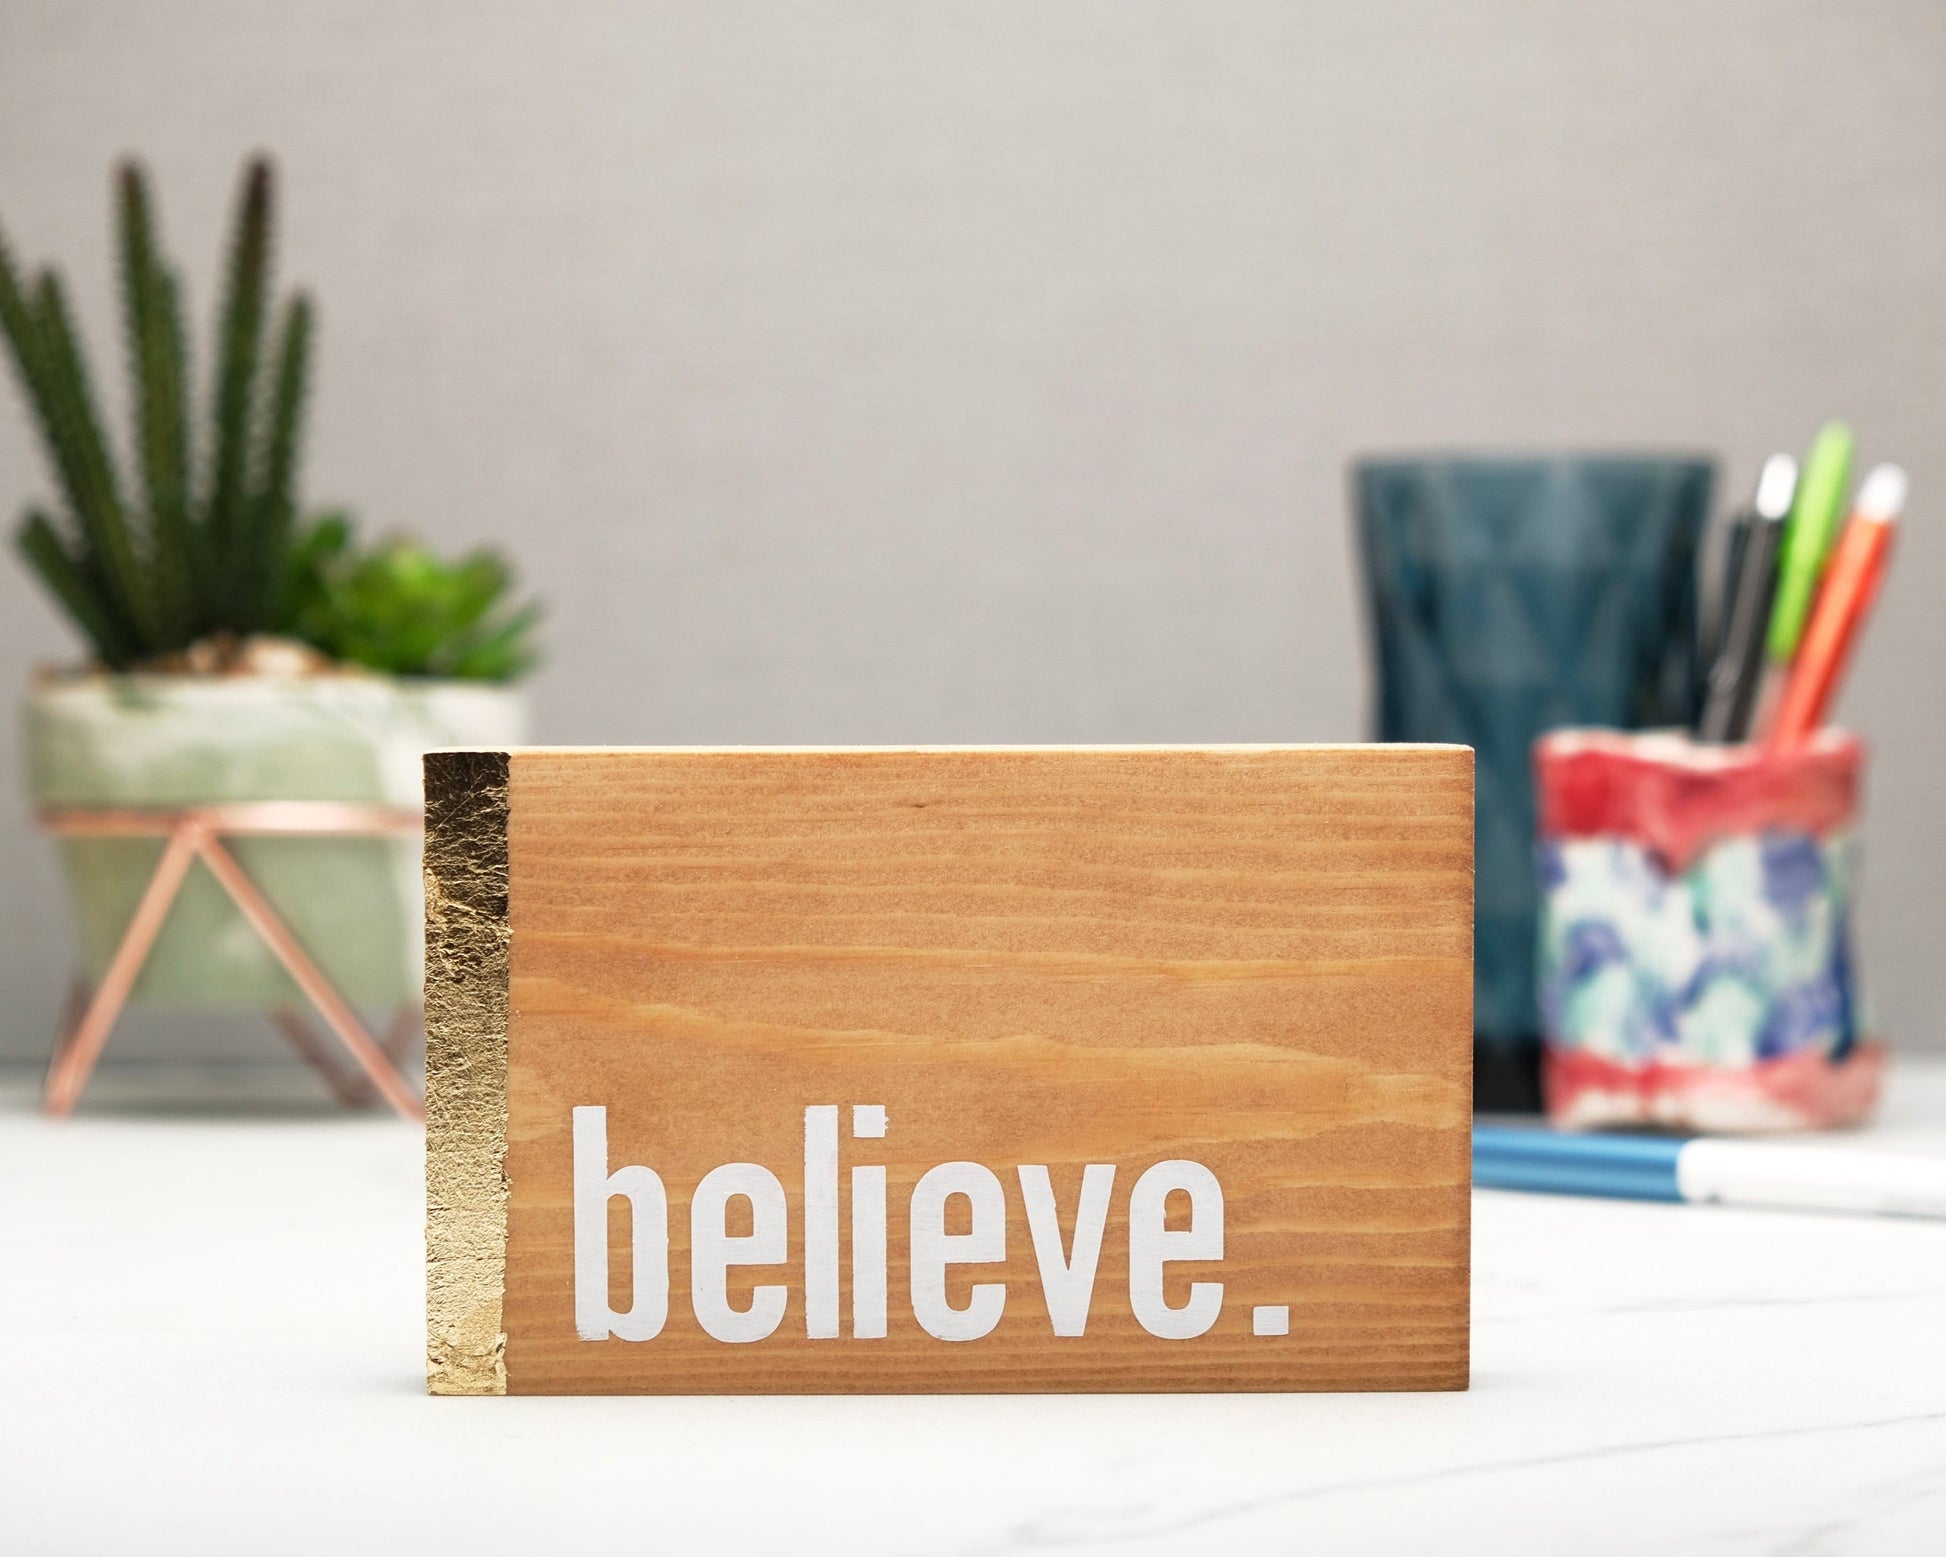 Small freestanding rectangular wooden sign facing straight on. Natural wood color with gold vertical border on left side. White painted message in chunky font with full stop, believe. Plant and pen pot out of focus in background.